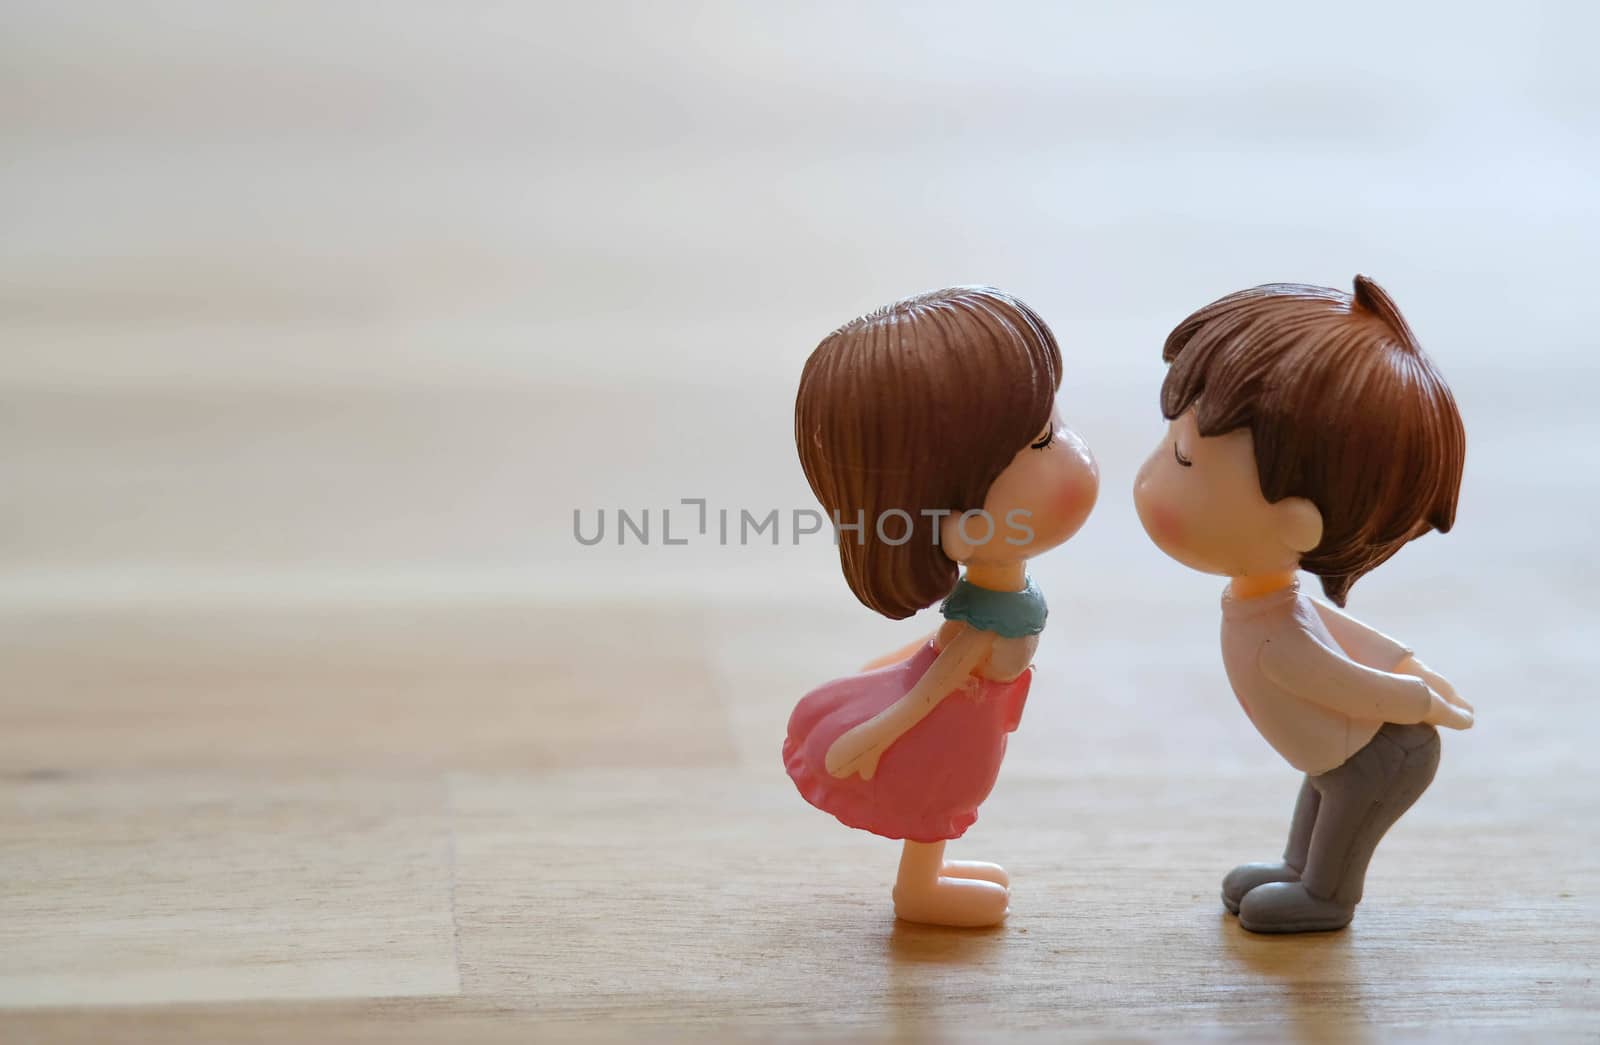 The Miniature Couple dolls Boy and Girl Romantic Kiss with Heart by Bonn2210